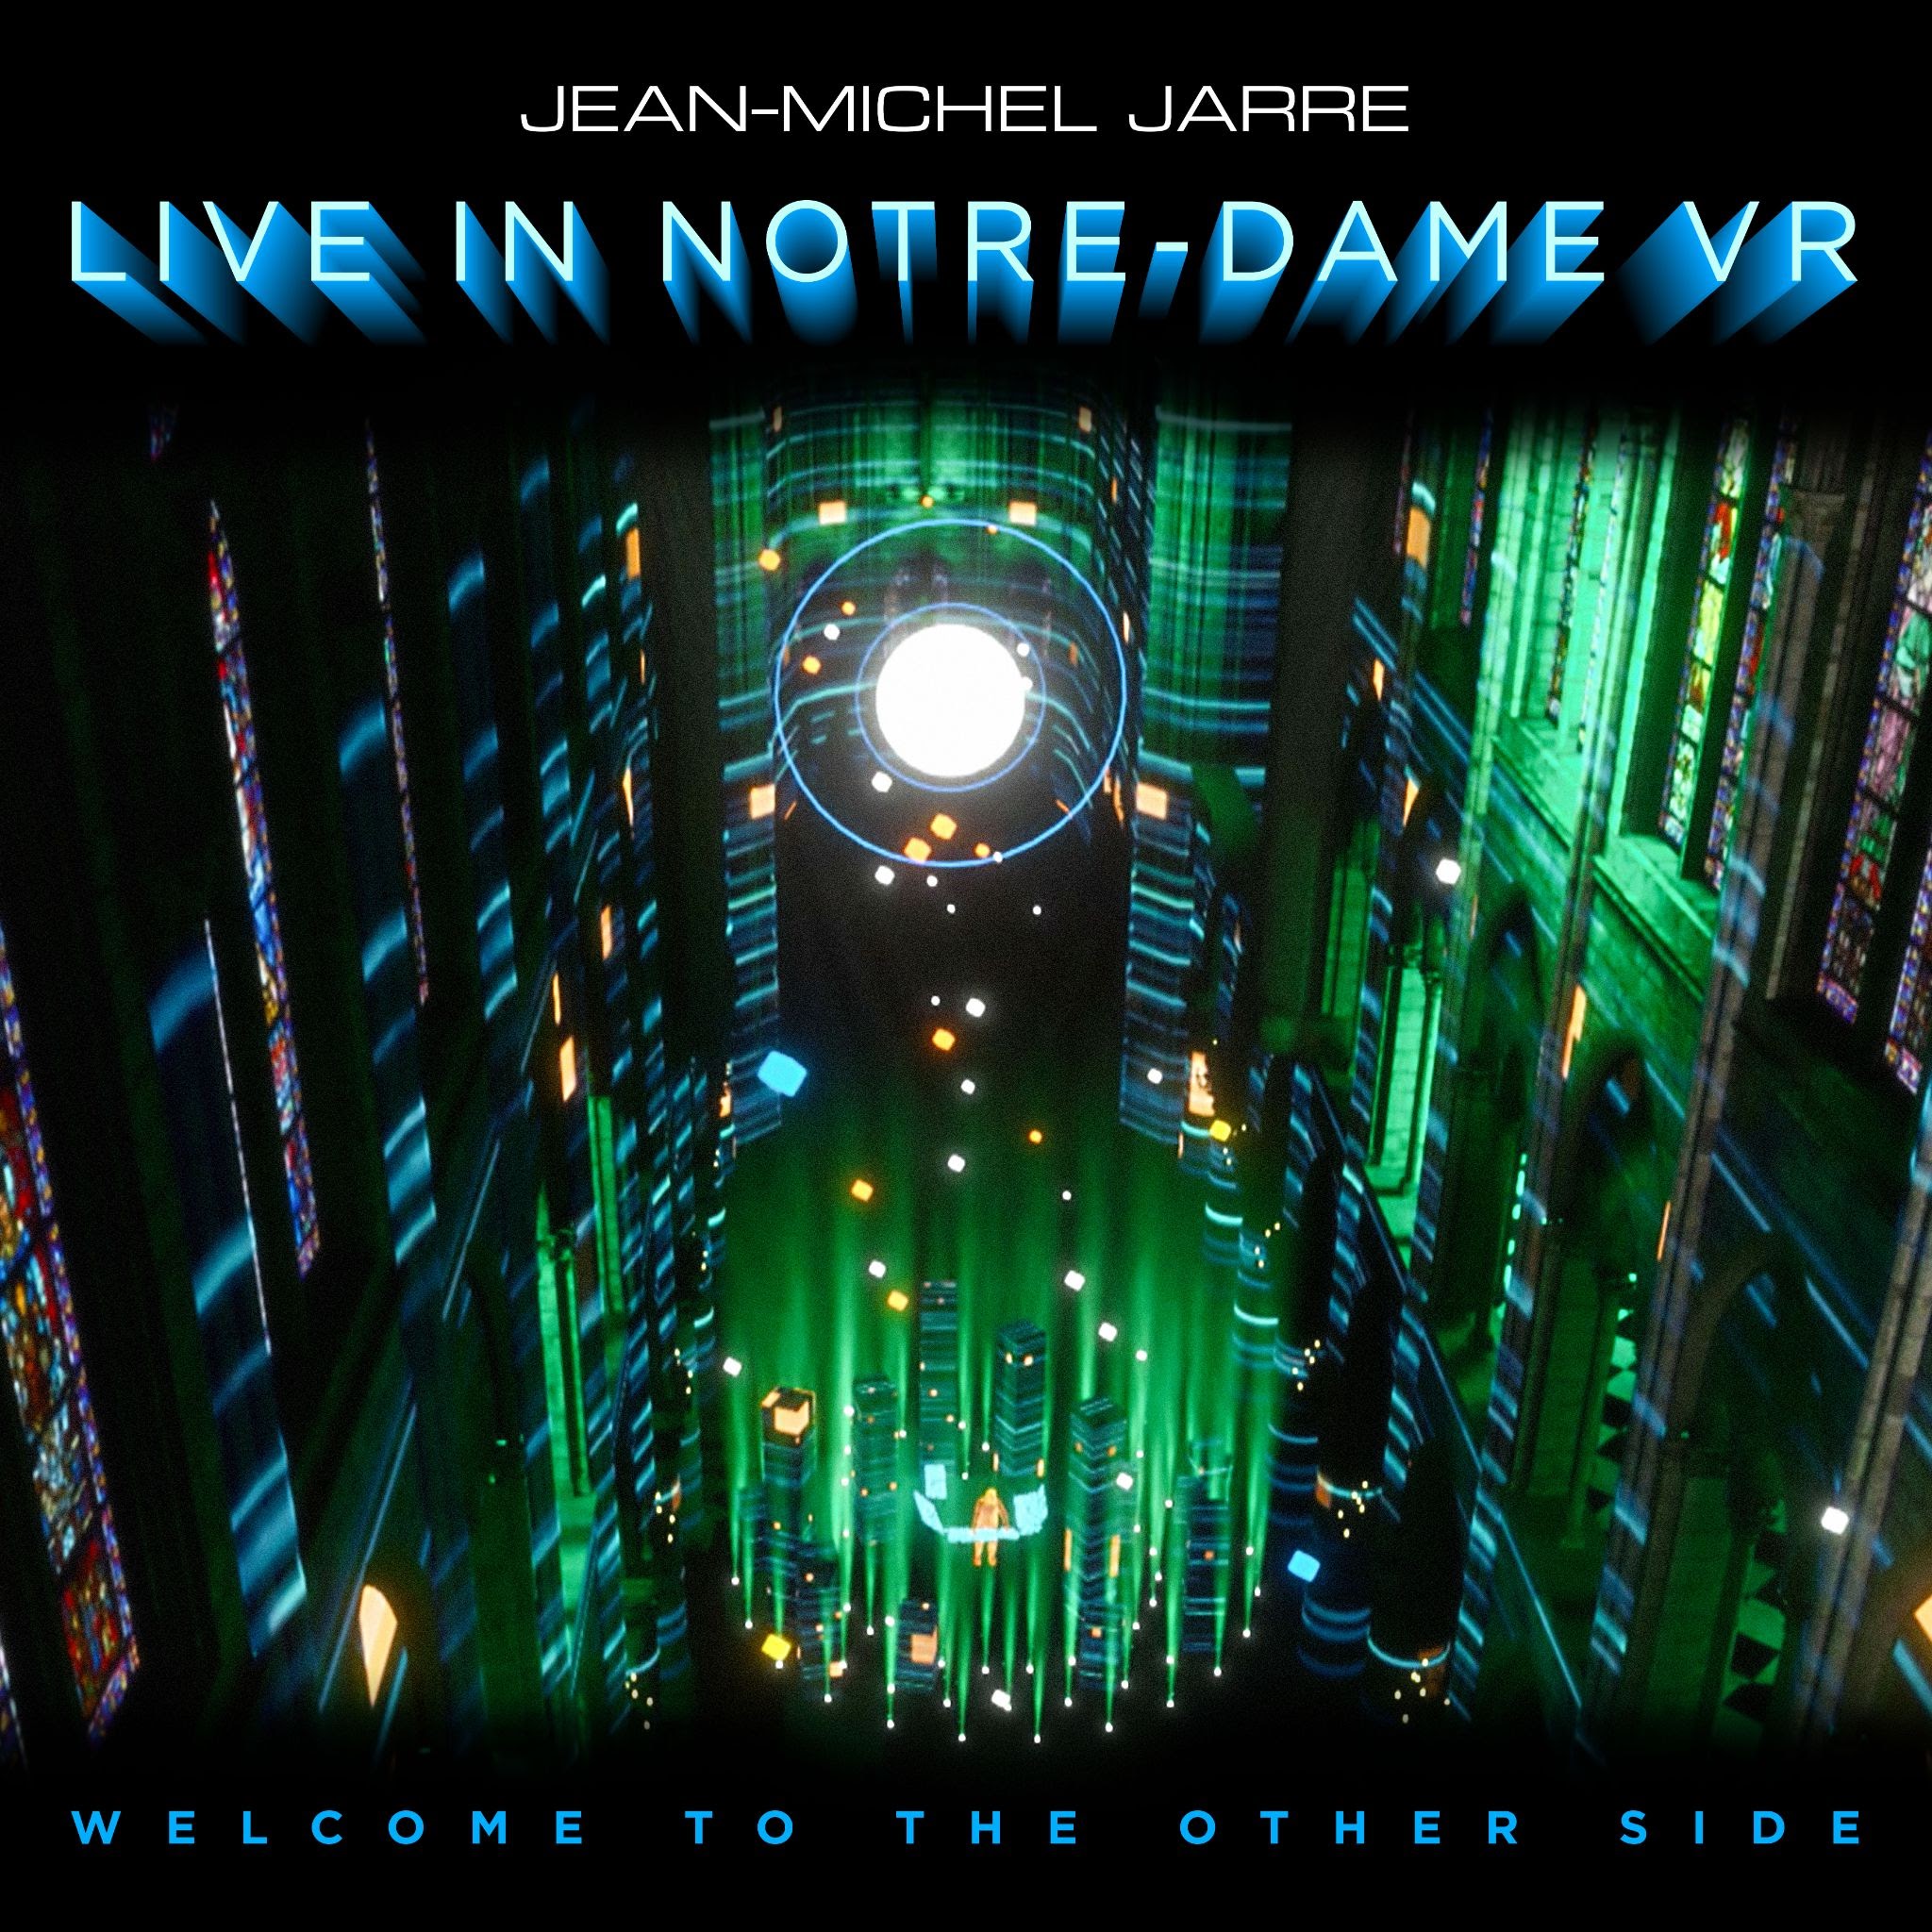 JEAN-MICHEL JARRE Announces Physical Release of Groundbreaking NYE Performance of 'Welcome to the Other Side'